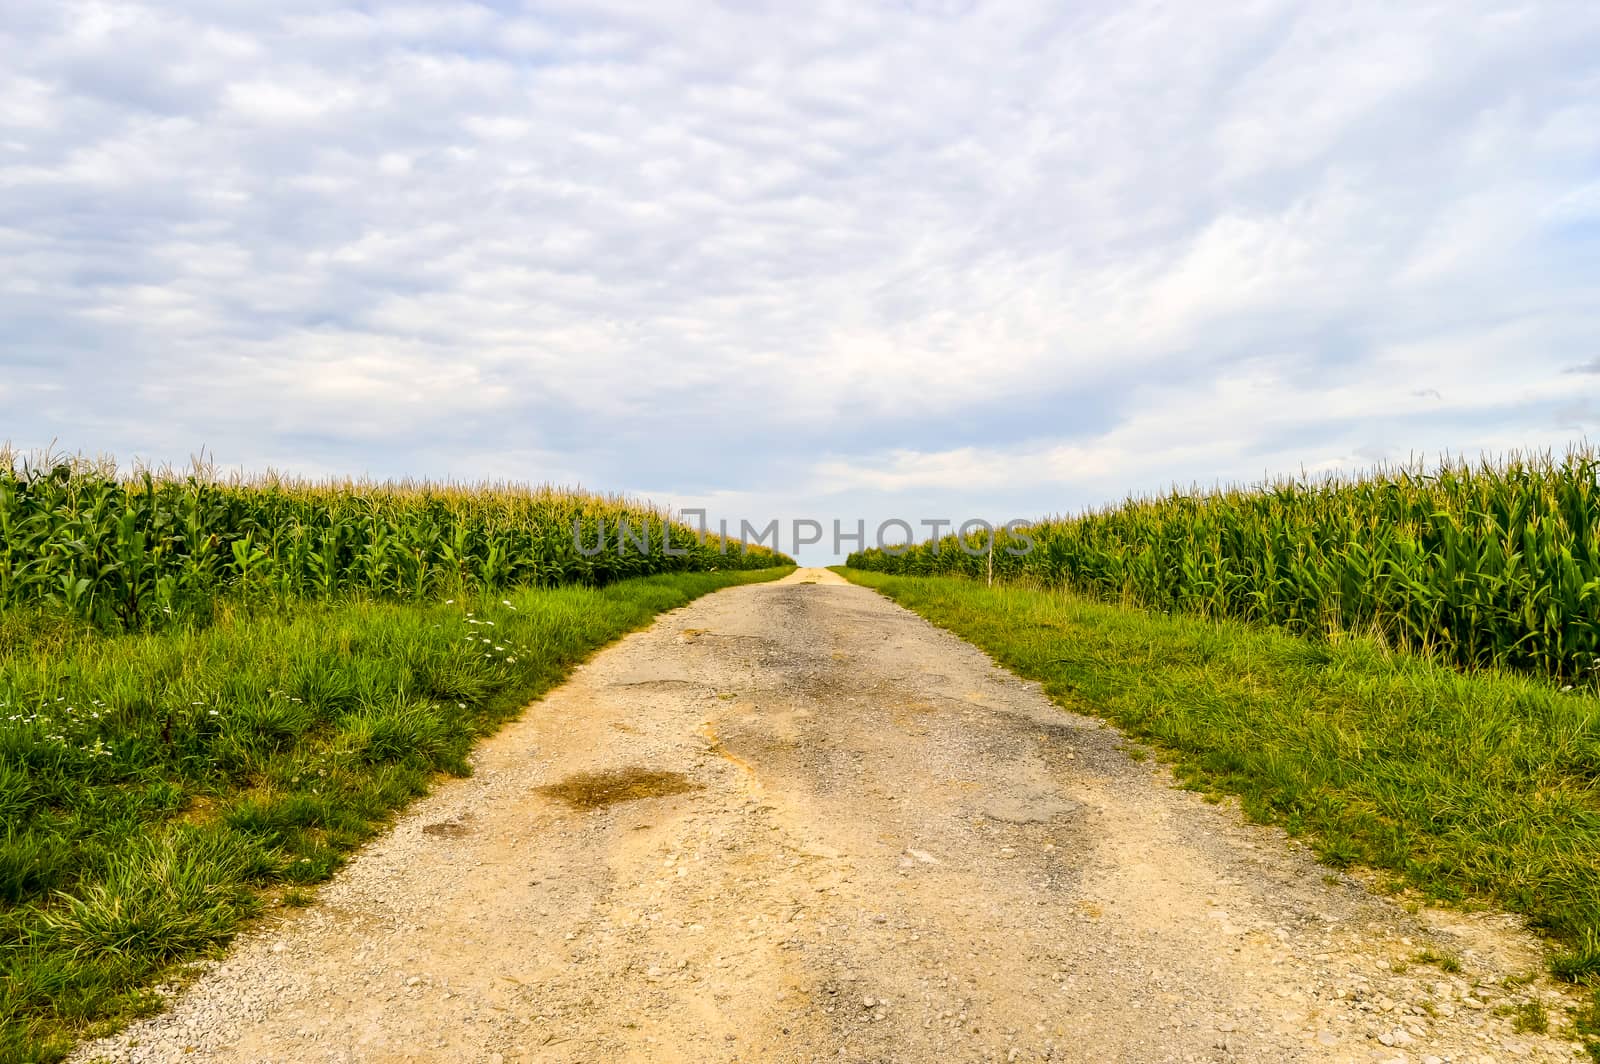 Path between corn fields in the department of Meuse in France